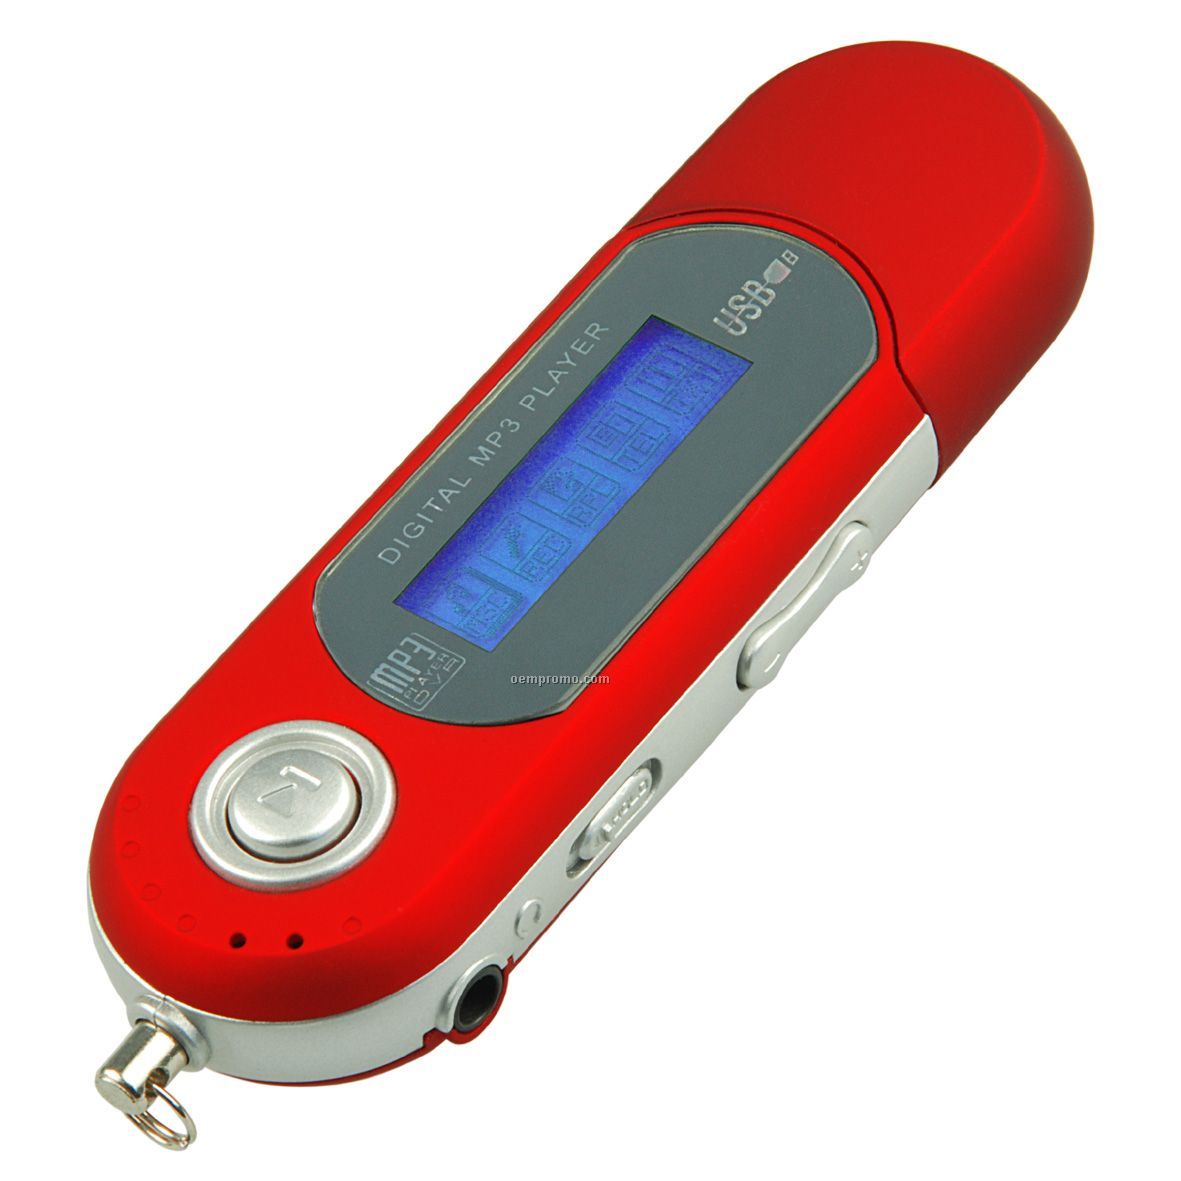 Mp3 Player With Curved Ends (8 Gb)